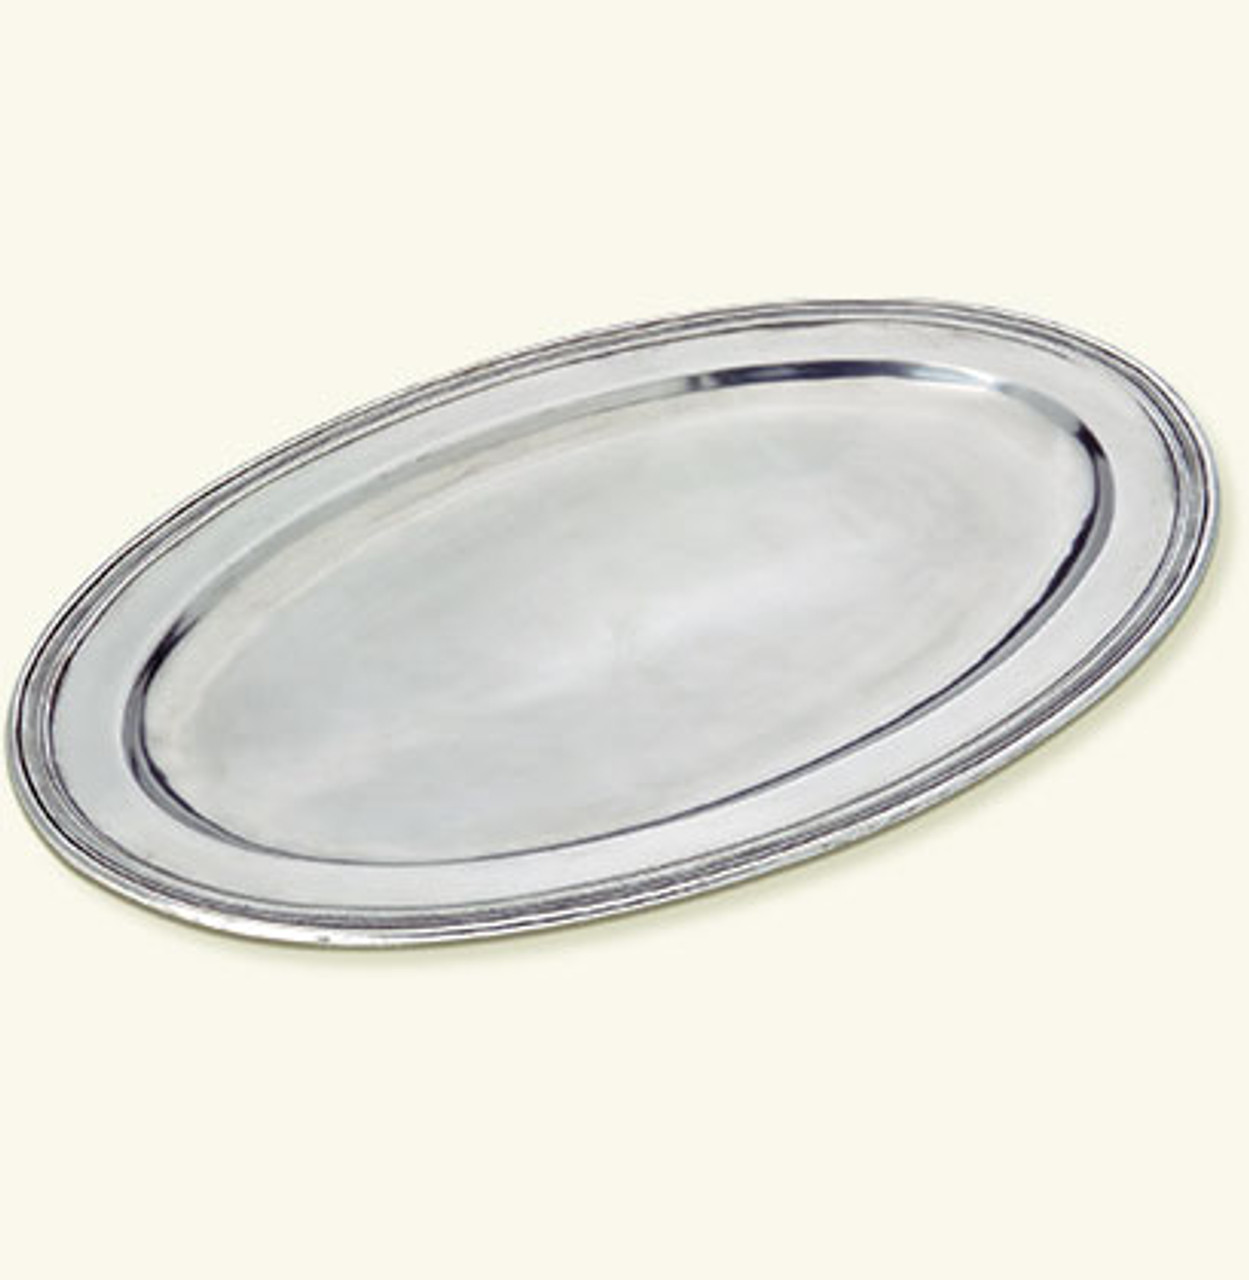 https://cdn11.bigcommerce.com/s-e0xlh4avpe/images/stencil/1280x1280/products/104048/137461/match-italian-pewter-oval-platter-large-35__95846.1650937439.jpg?c=1